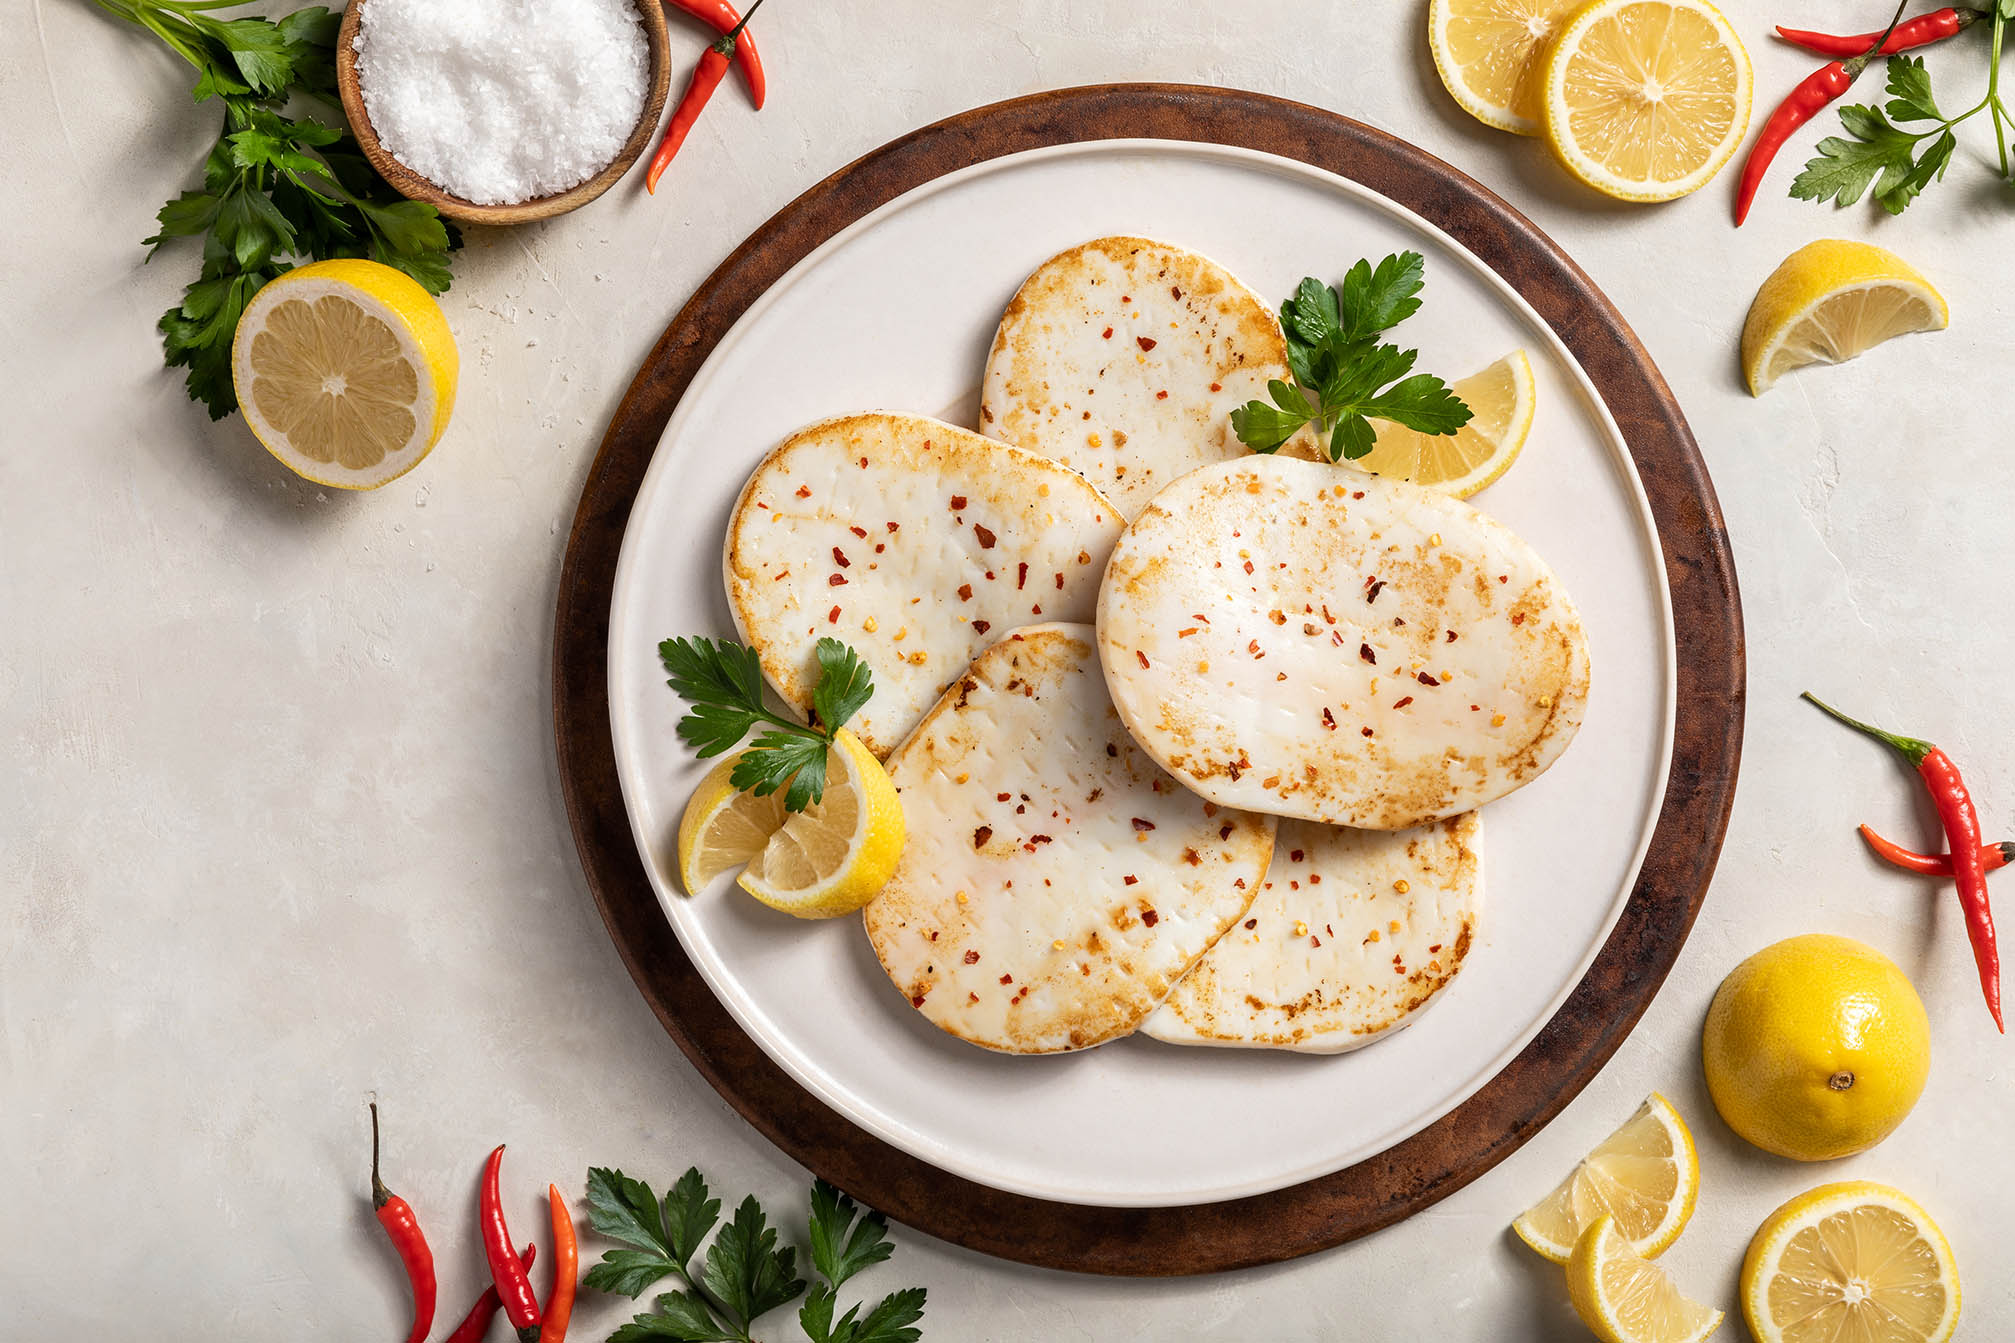 A plate of lightly cooked calamari steaks, garnished with parsley, lemons, and small hot peppers